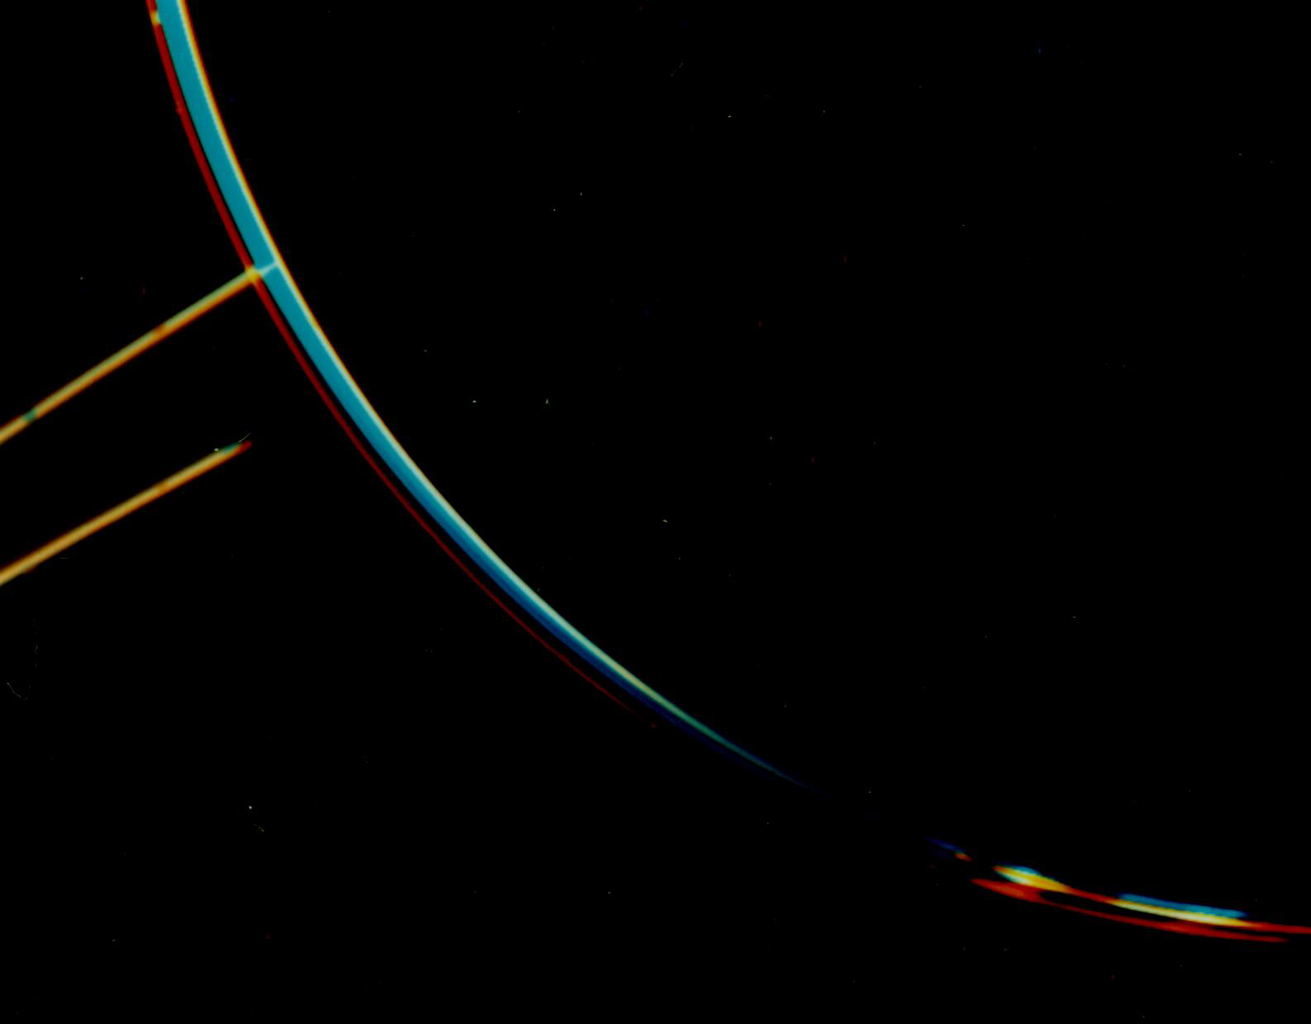 Jupiter's faint ring system is shown in this color composite as two light orange lines protruding from the left toward Jupiter's limb. This image was taken by NASA's Voyager 2 spacecraft.